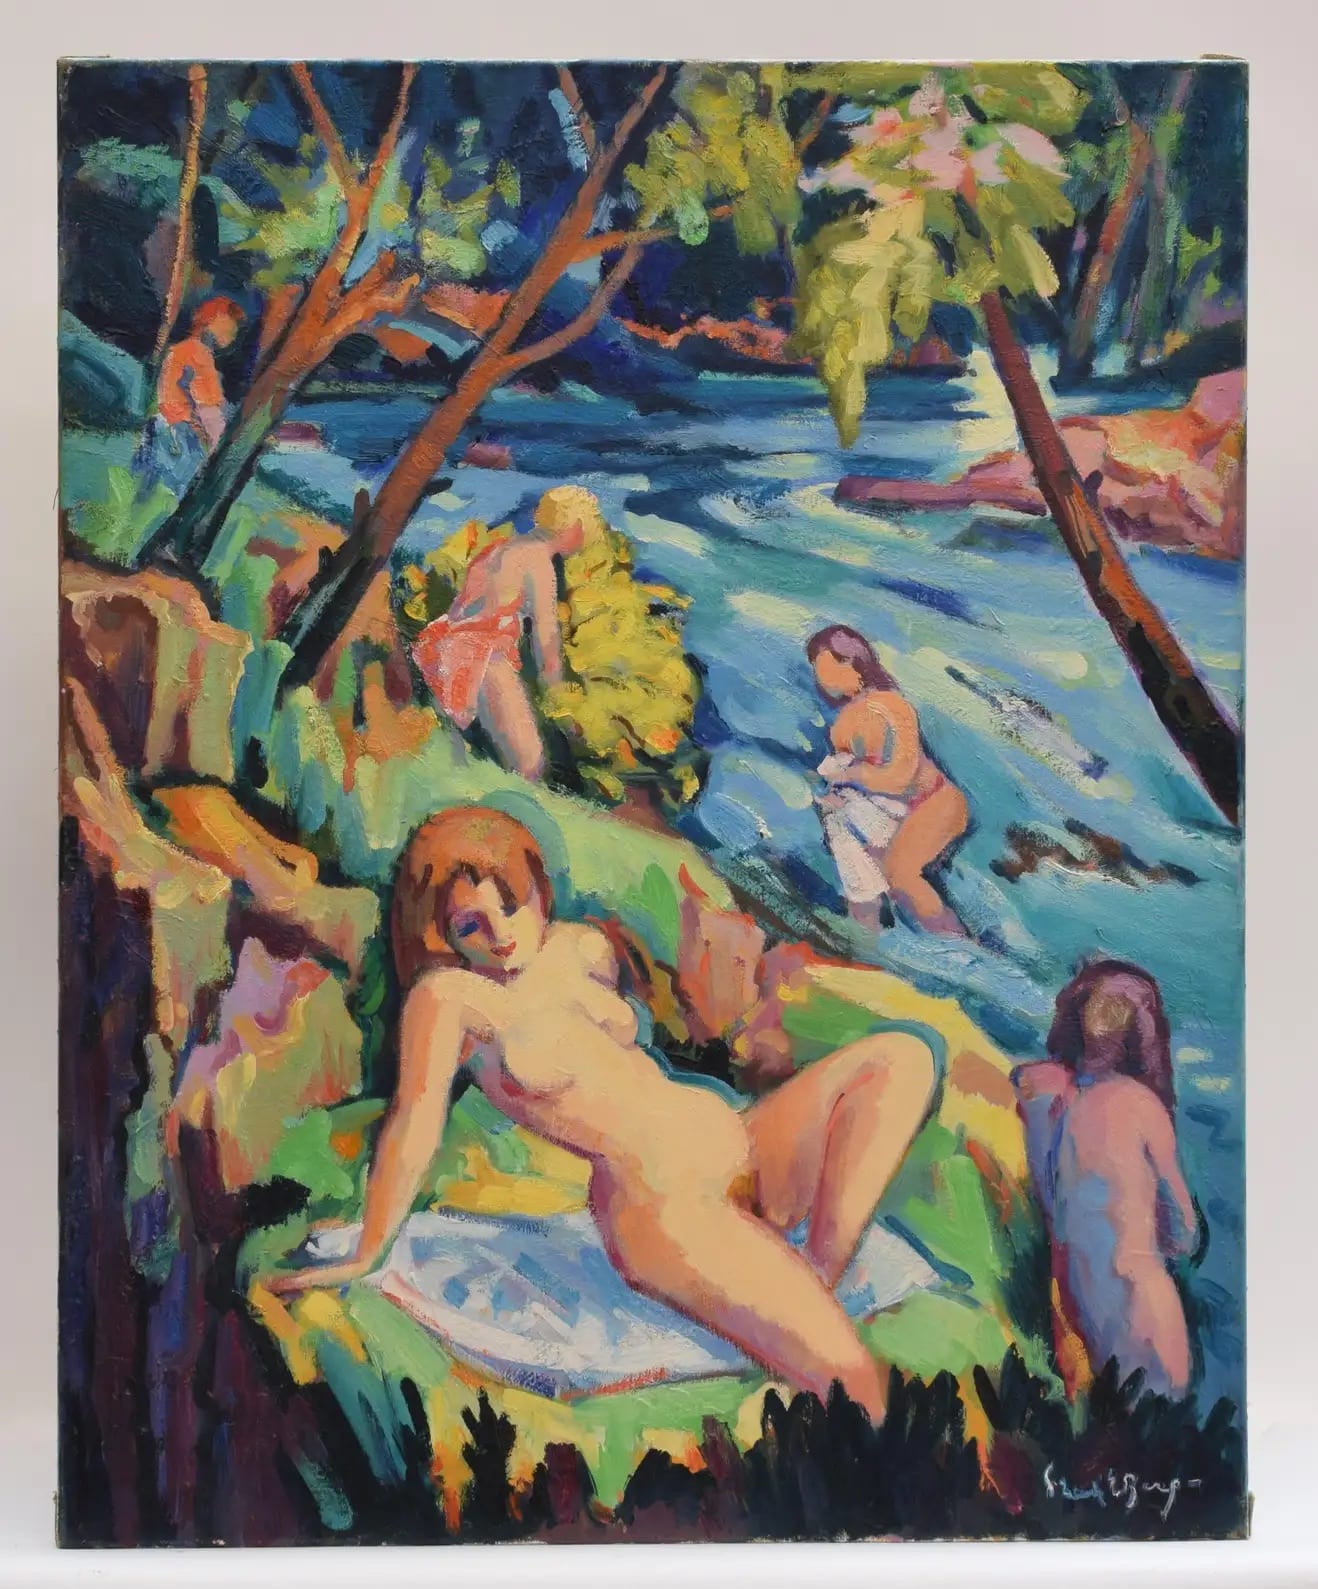 Bathers nearby the river